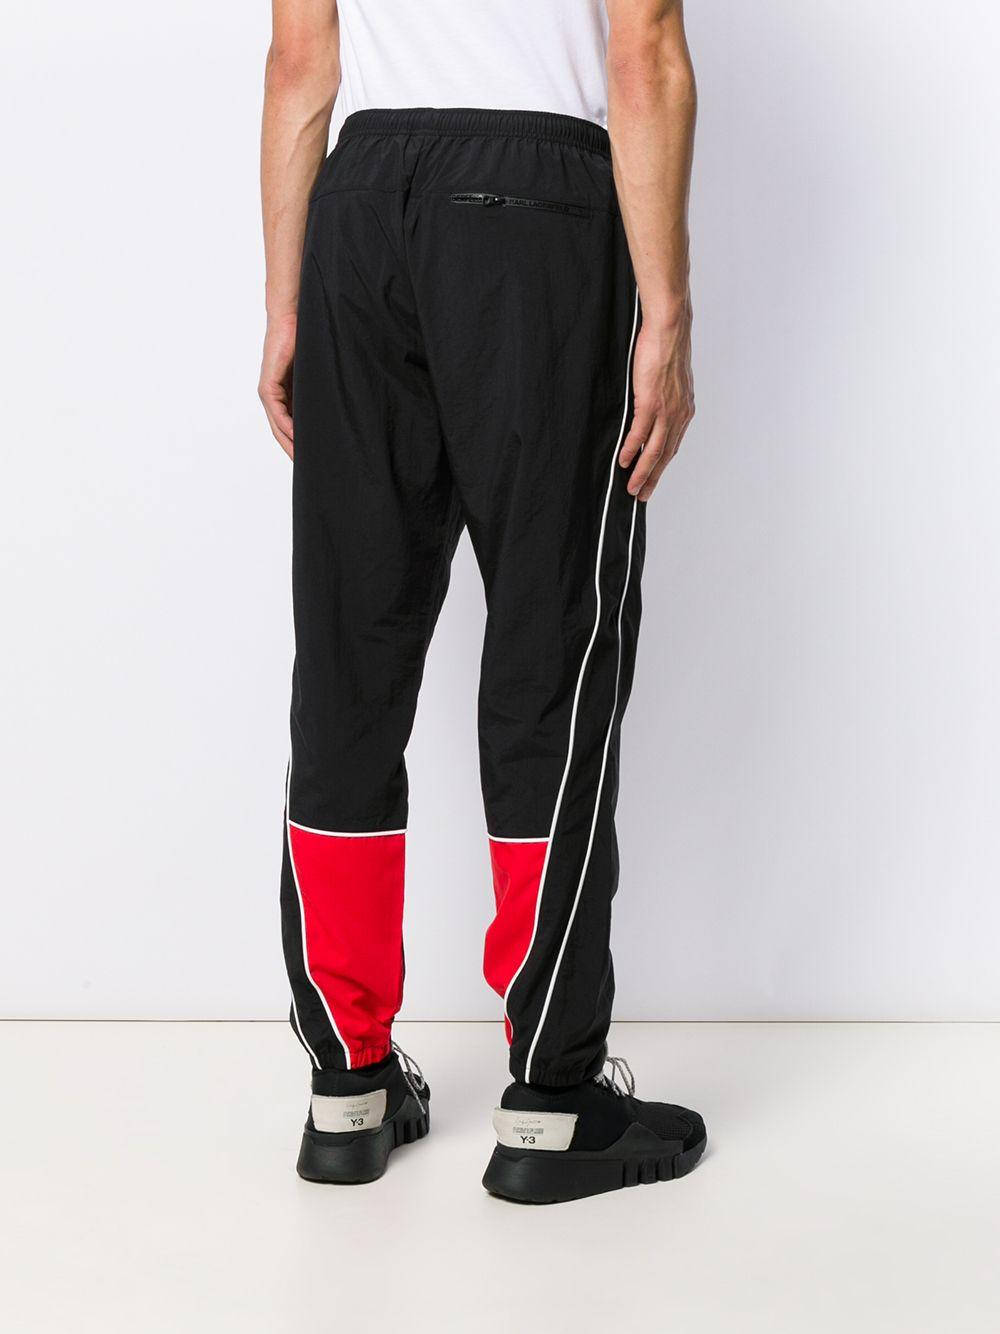 Karl Lagerfeld Synthetic X Puma Track Pants in Black for Men - Lyst